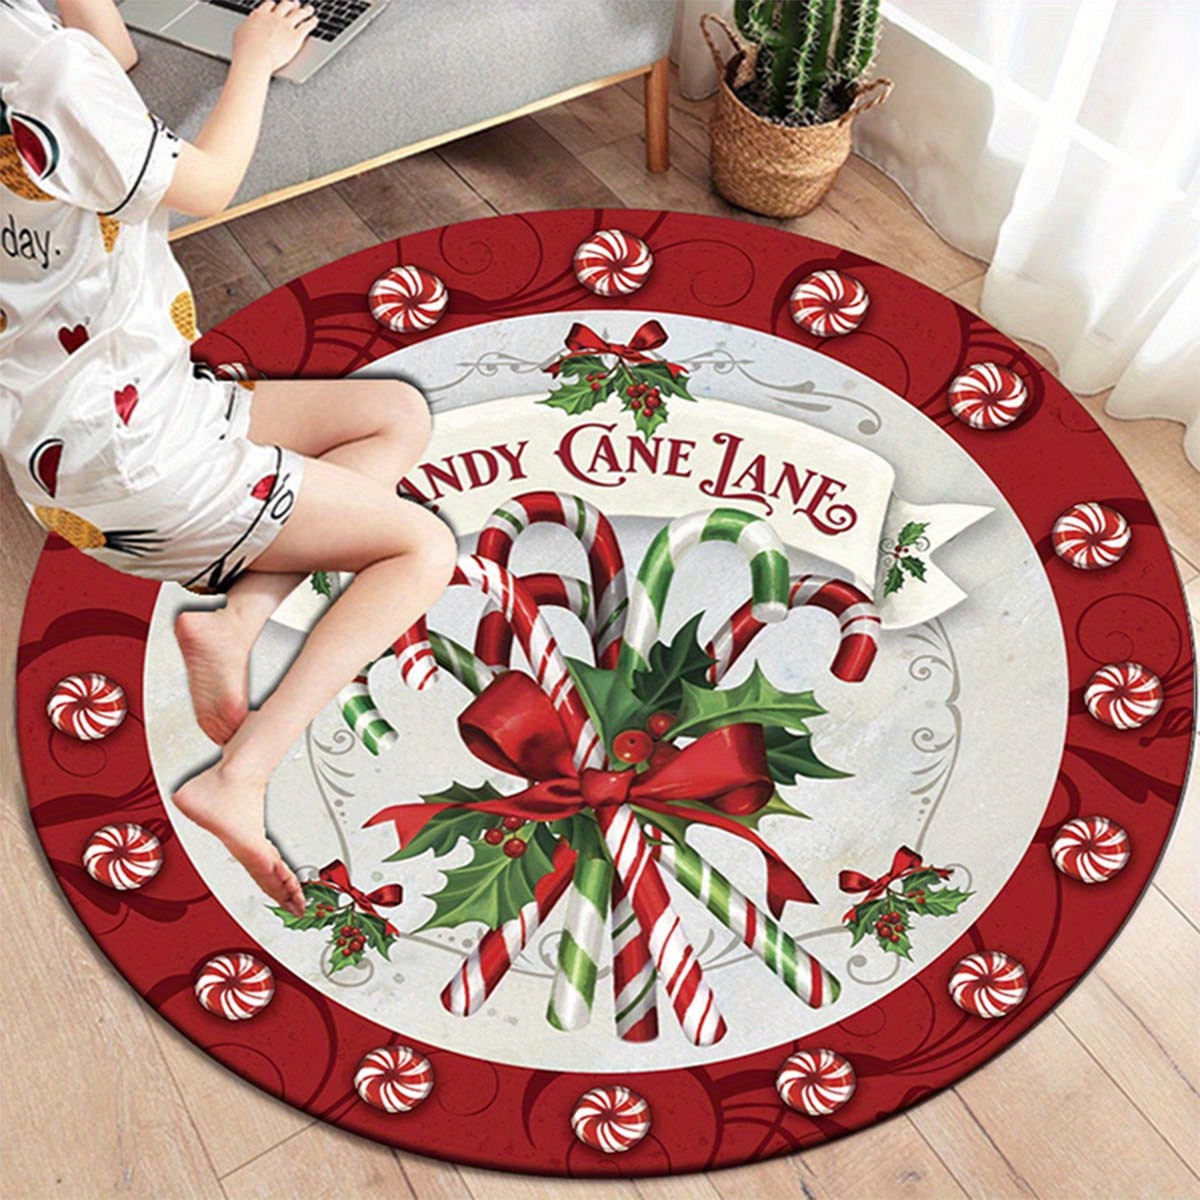 

Merry Christmas Round Area Rug - Non-slip, Washable, Polyester Carpet Mat For Indoor, Outdoor, Office, Nursery, Home Decor - Candy Cane Design